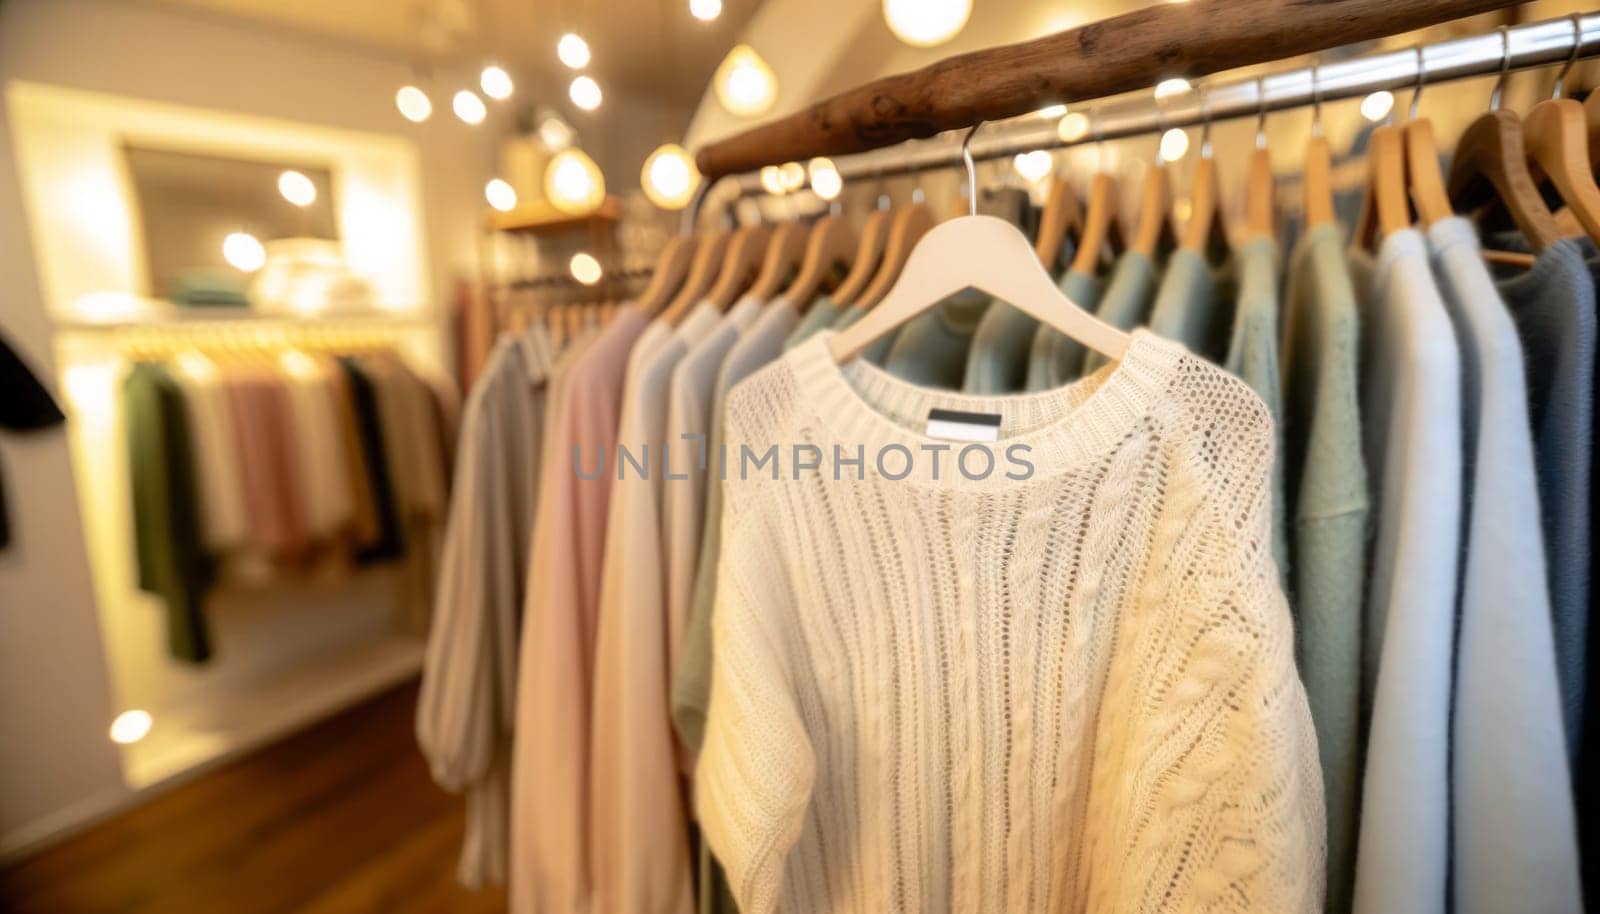 A wide-angle photography of a cozy fashion retail setting. The focus is on a knitted sweater displayed in the foreground, hanging on a wooden hanger. The sweater is off-white with a detailed knit pattern. In the blurred background, there is a clothing rack with various garments in soft pastel colors, creating a cohesive and gentle palette. The ambient lighting is warm and inviting, with bokeh lights that suggest a welcoming atmosphere typical of a boutique. The overall composition conveys a sense of seasonal fashion and comfortable elegance.